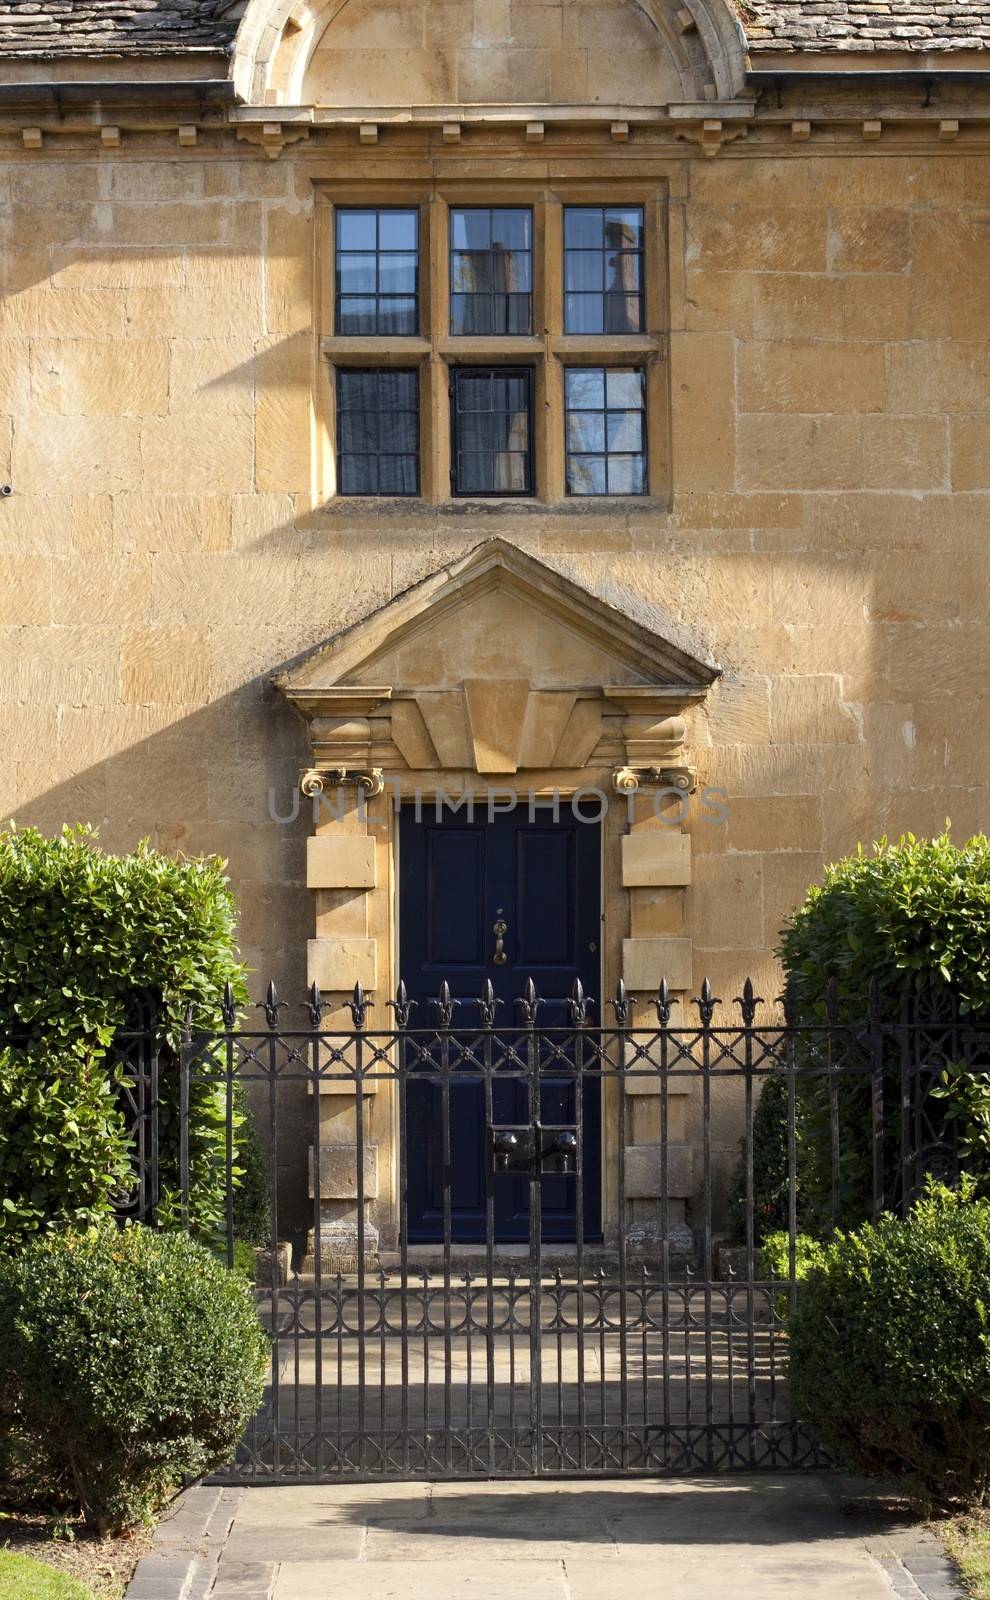 Queen Anne style house, Mickleton, Chipping Campden, England.